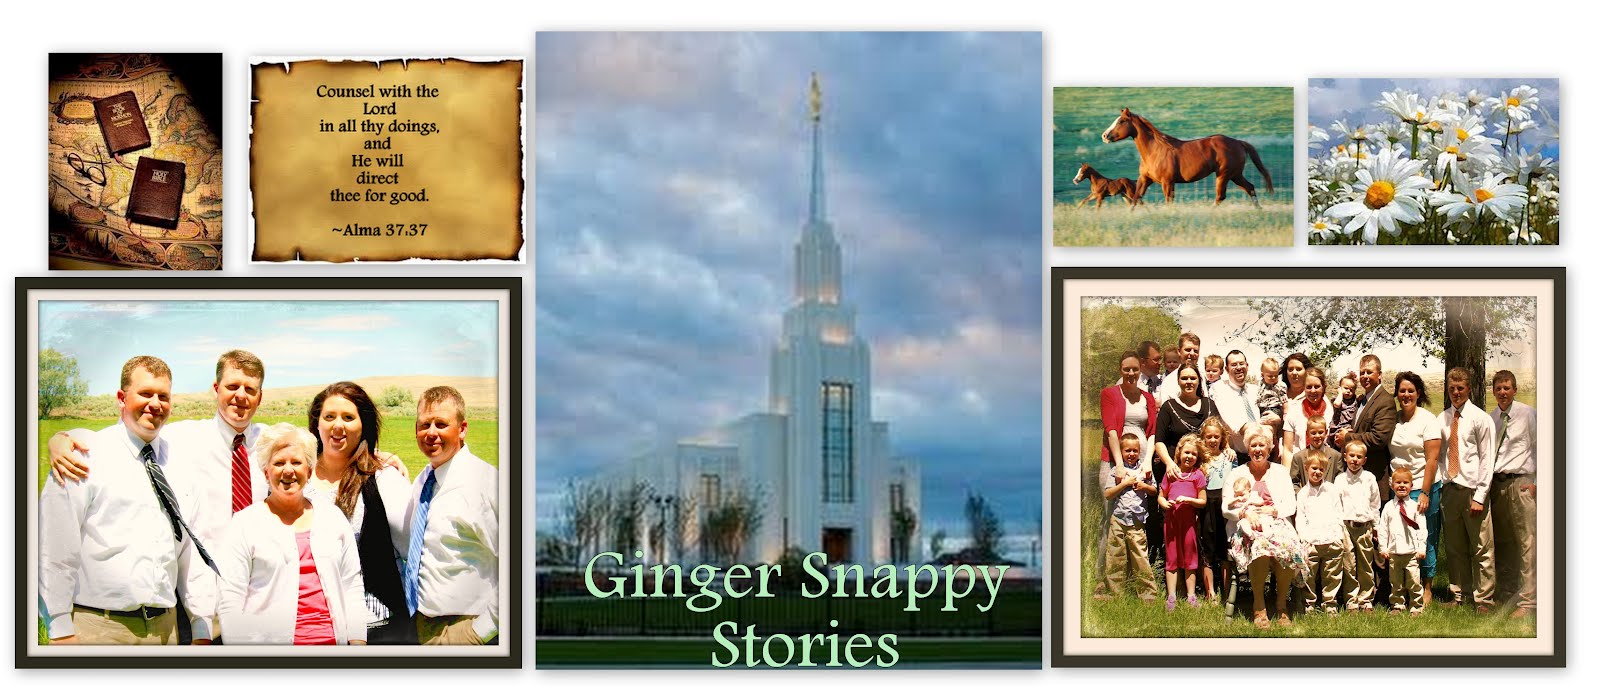 Ginger Snappy Stories